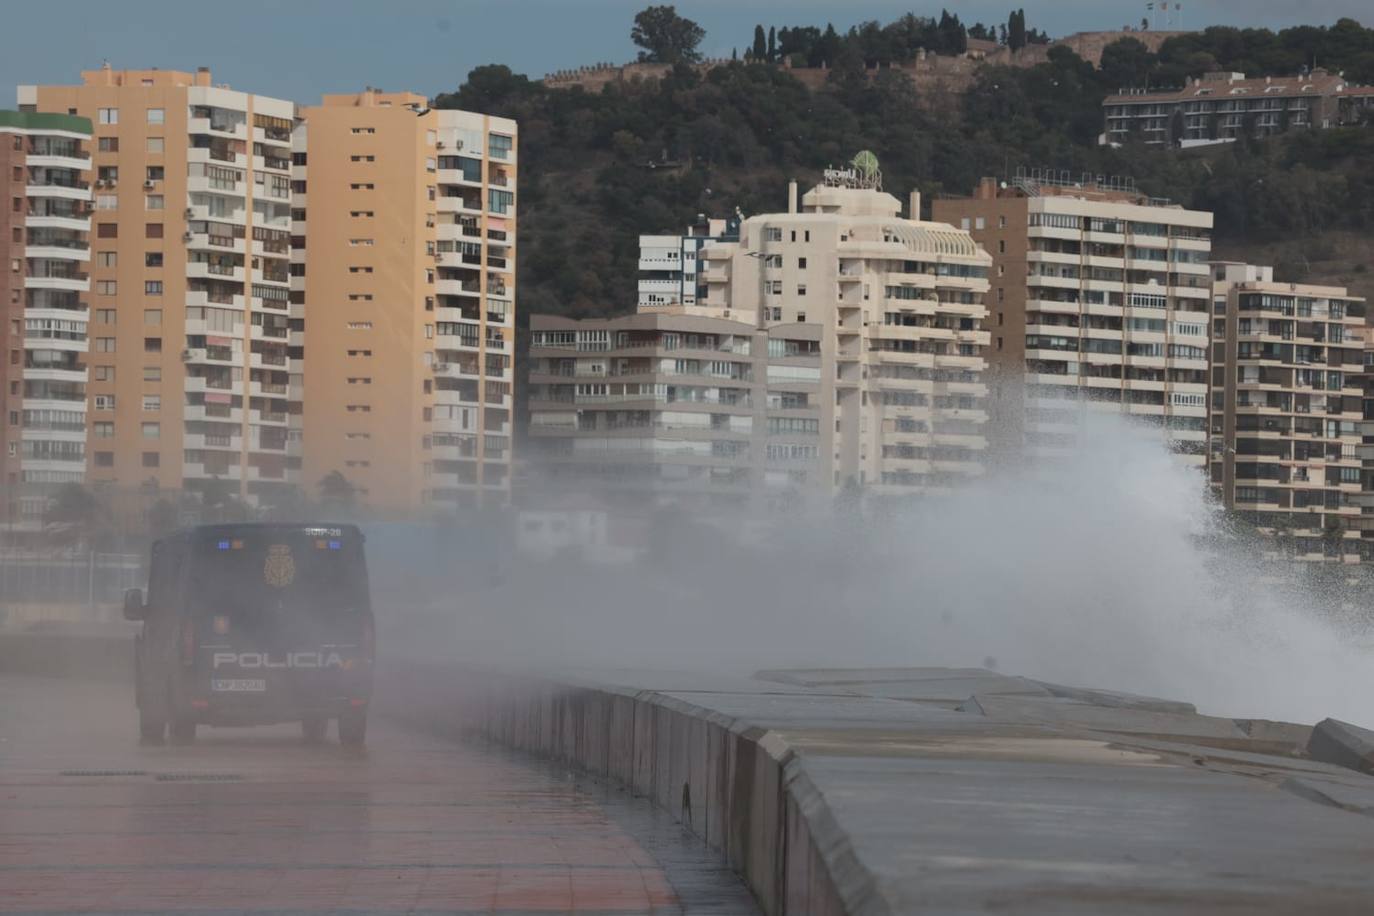 In pictures... strong winds and high waves batter the beaches of the Costa del Sol